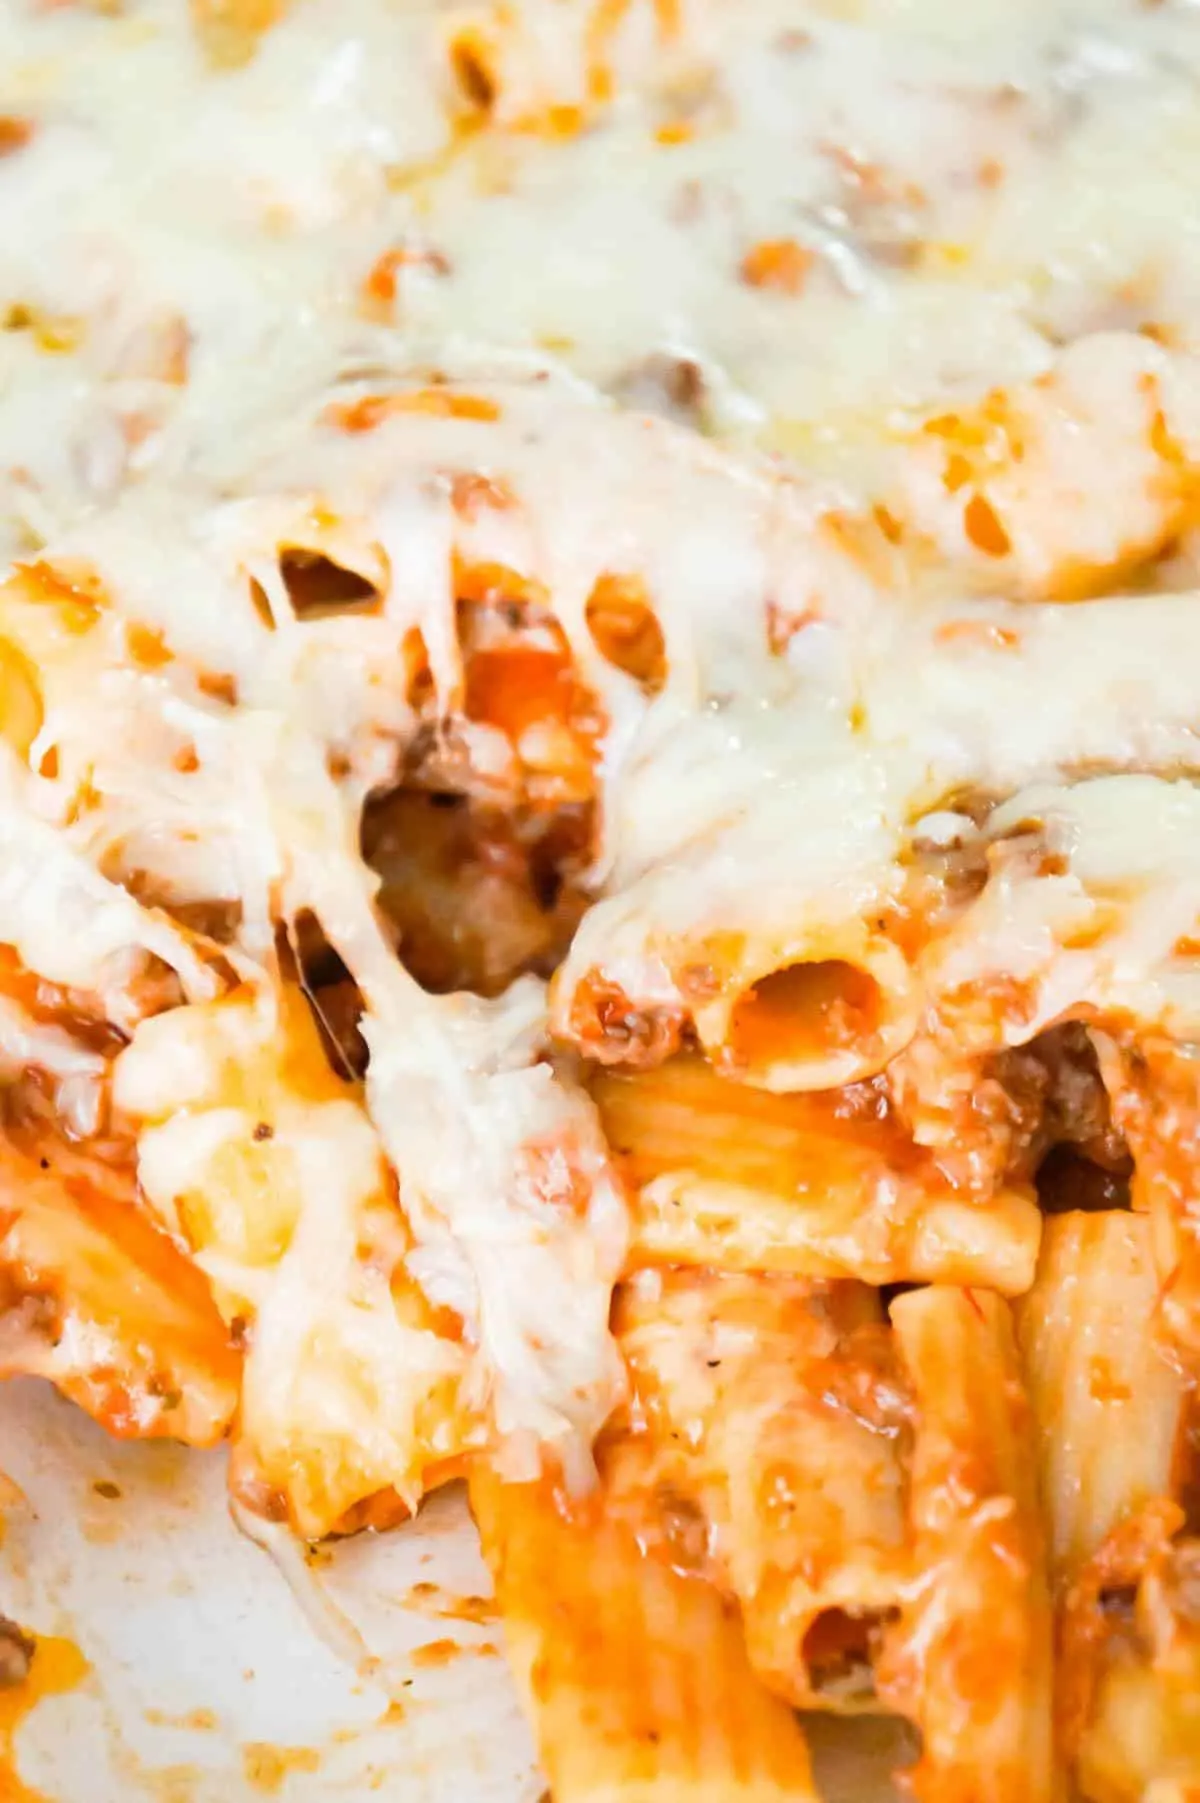 Baked Rigatoni Bolognese is a delicious pasta recipe loaded with ground beef, marinara and baked with mozzarella and Parmesan cheese.